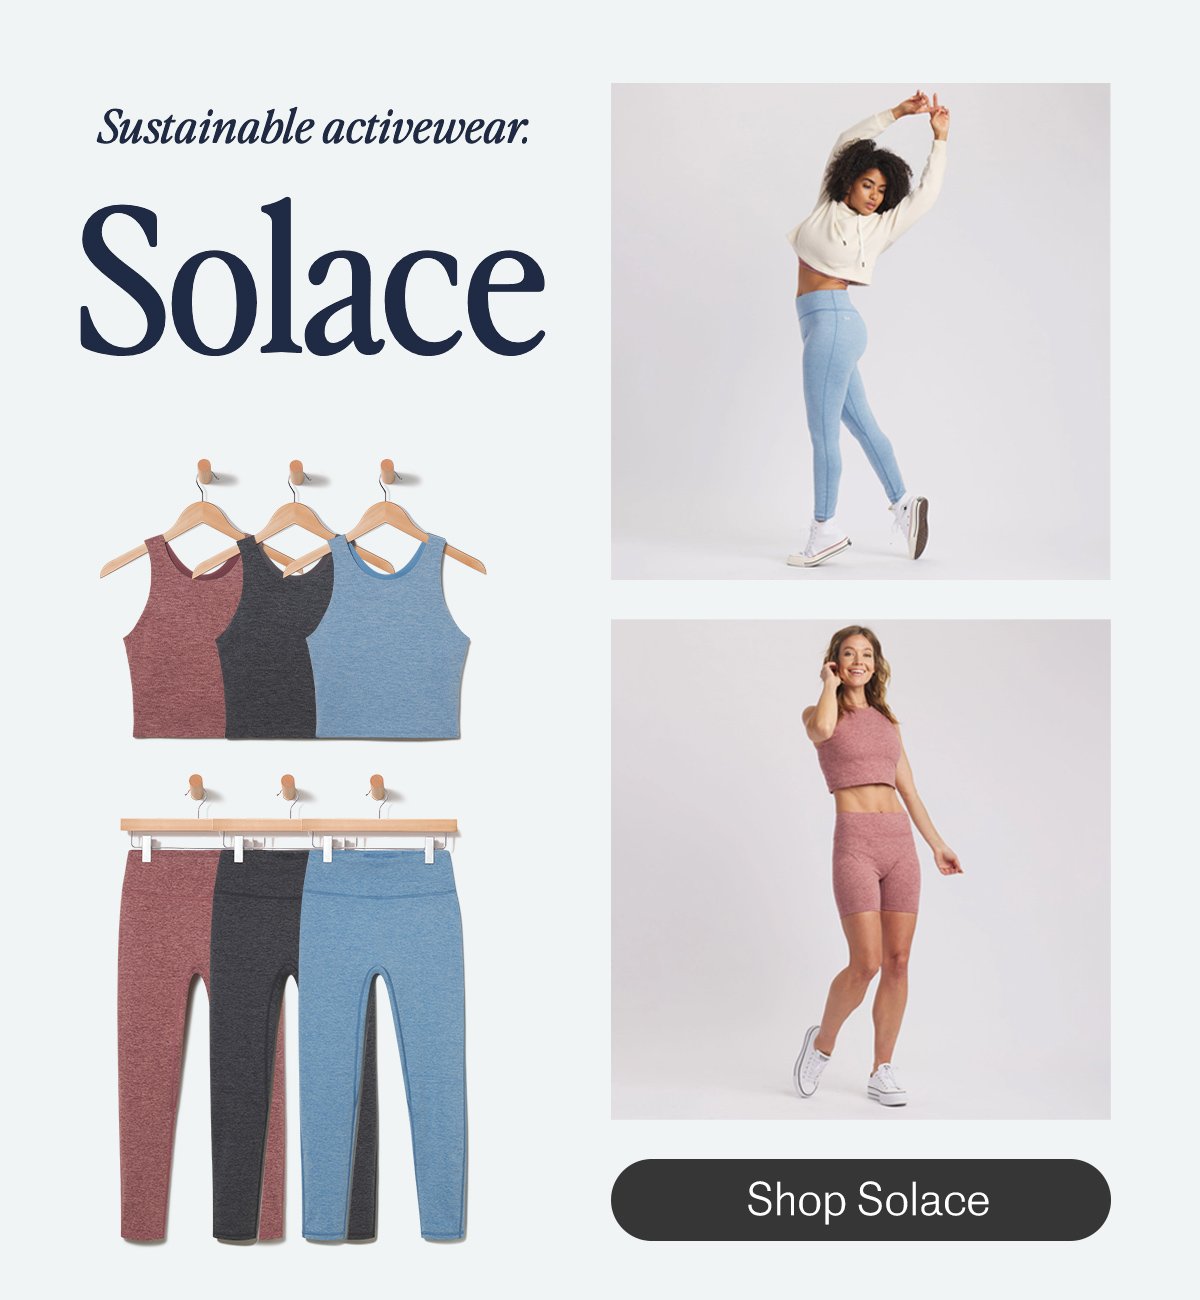 Solace. Sustainable activewear